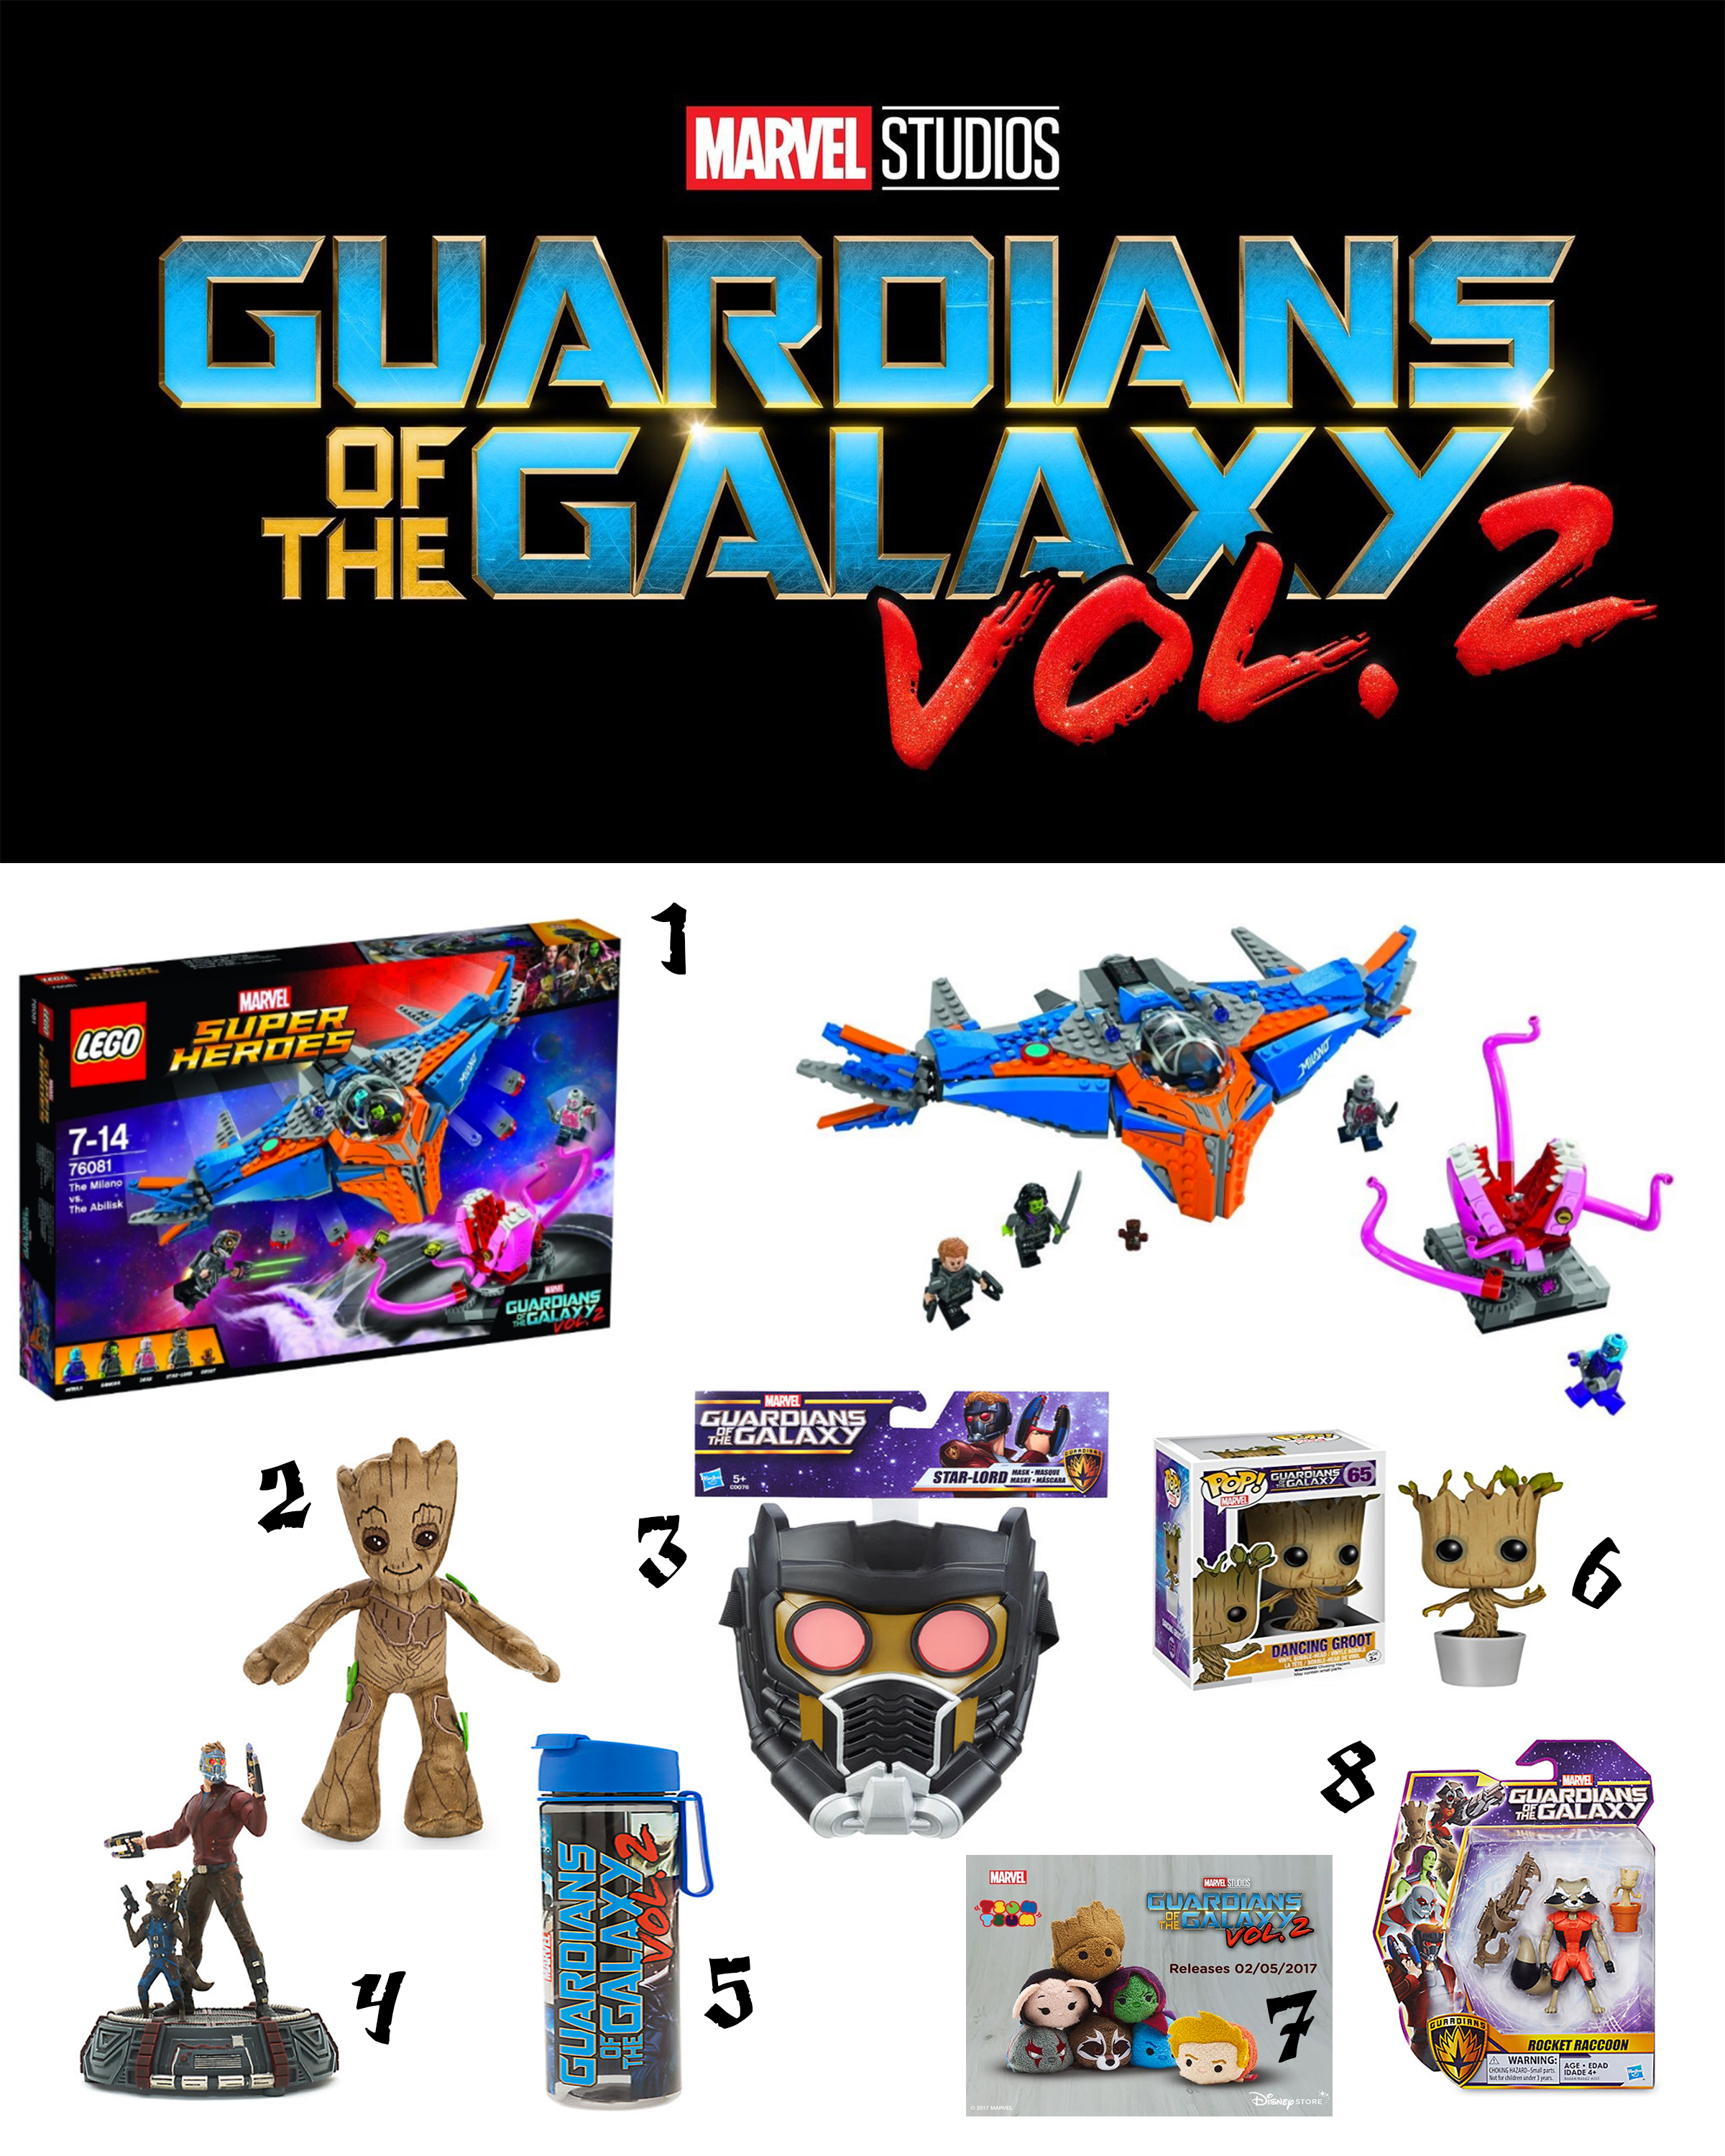 GUARDIANS OF THE GALAXY VOL. 2.: FAVOURITE MOVIE MERCHANDISE